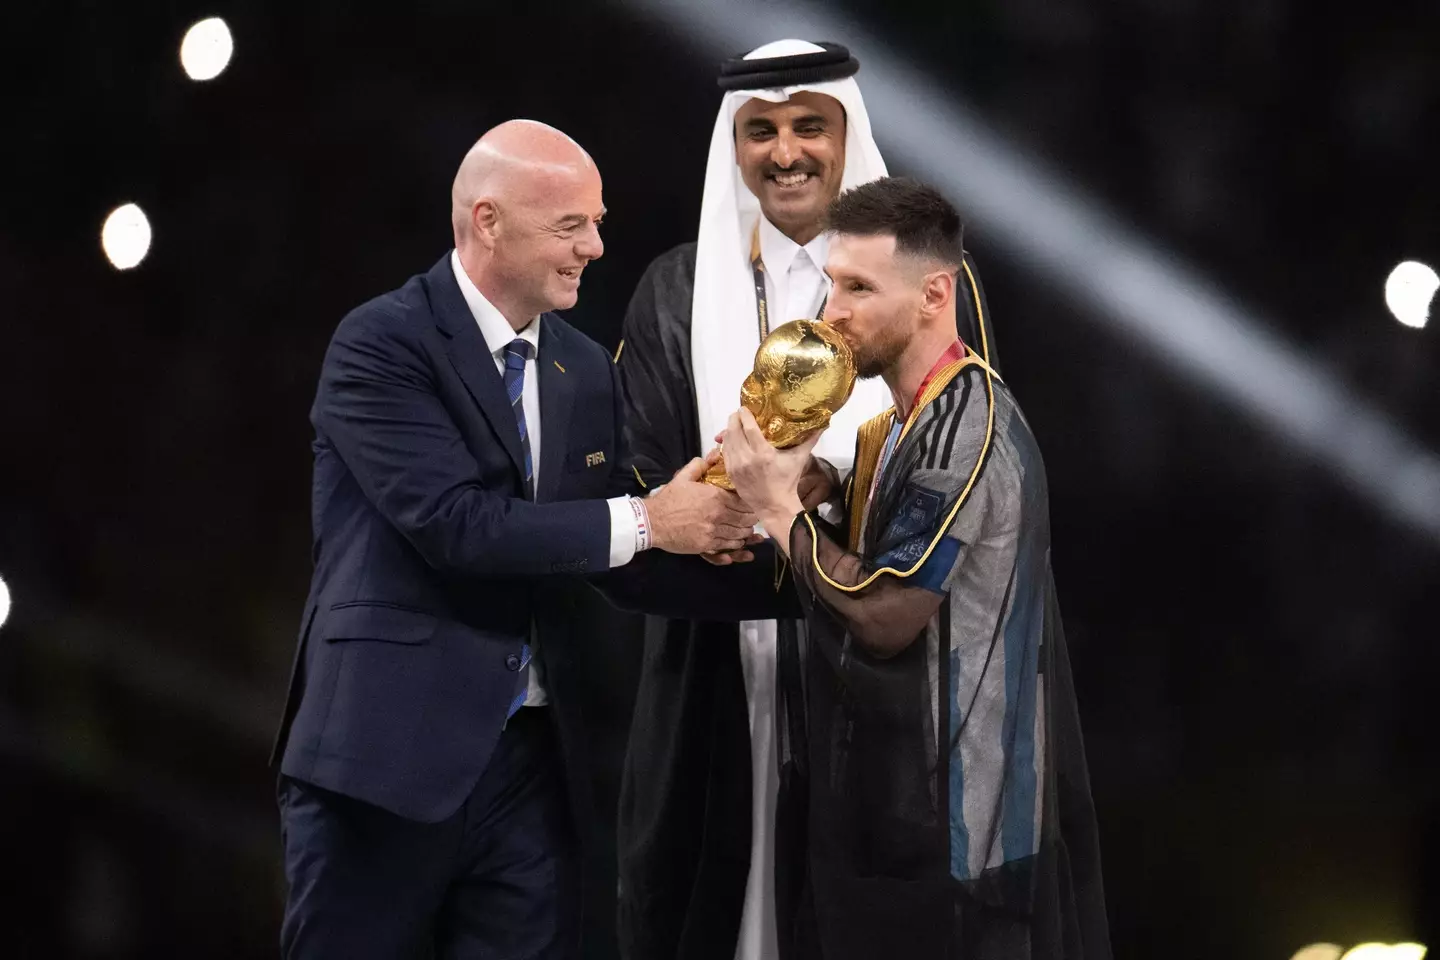 Messi with the actual World Cup trophy. (Image